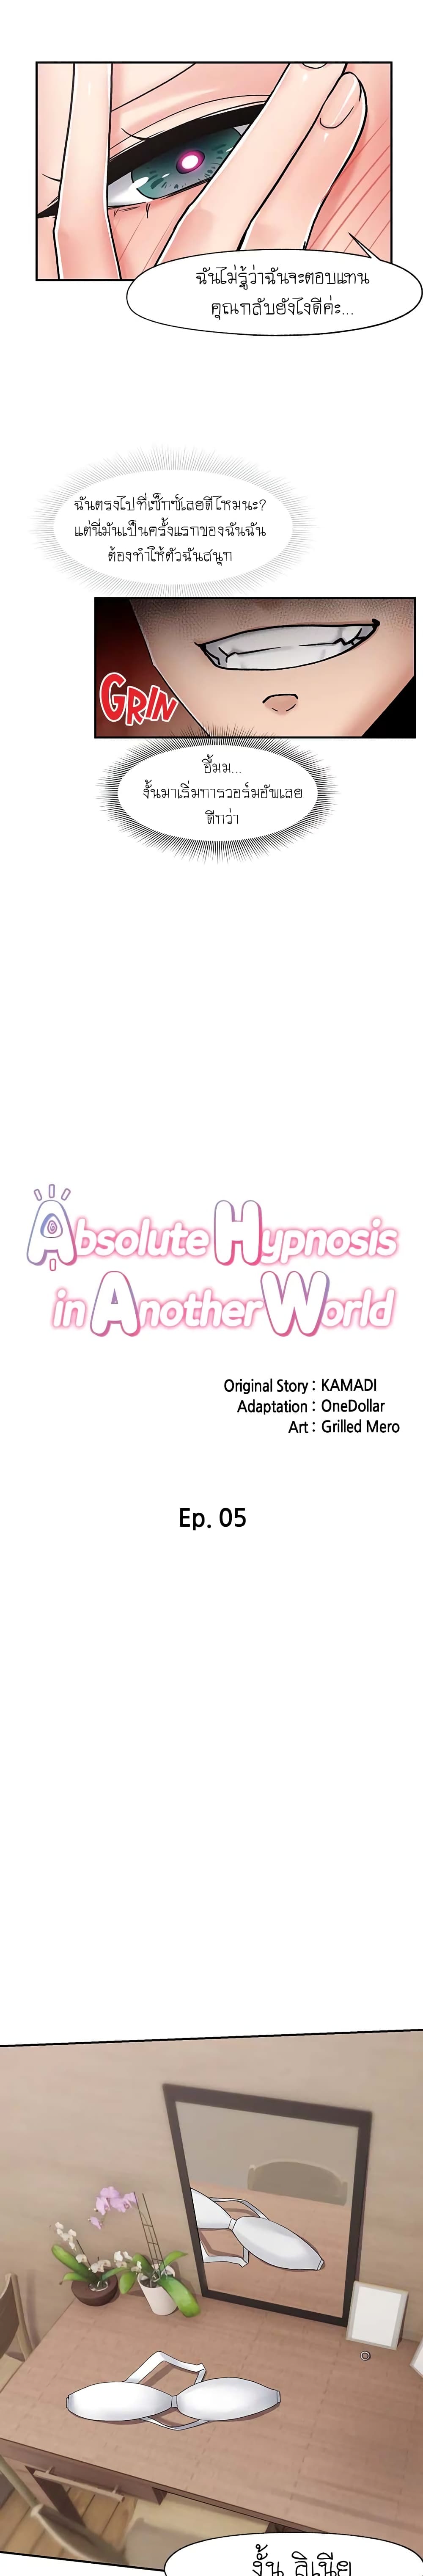 Absolute Hypnosis in Another World 5-5